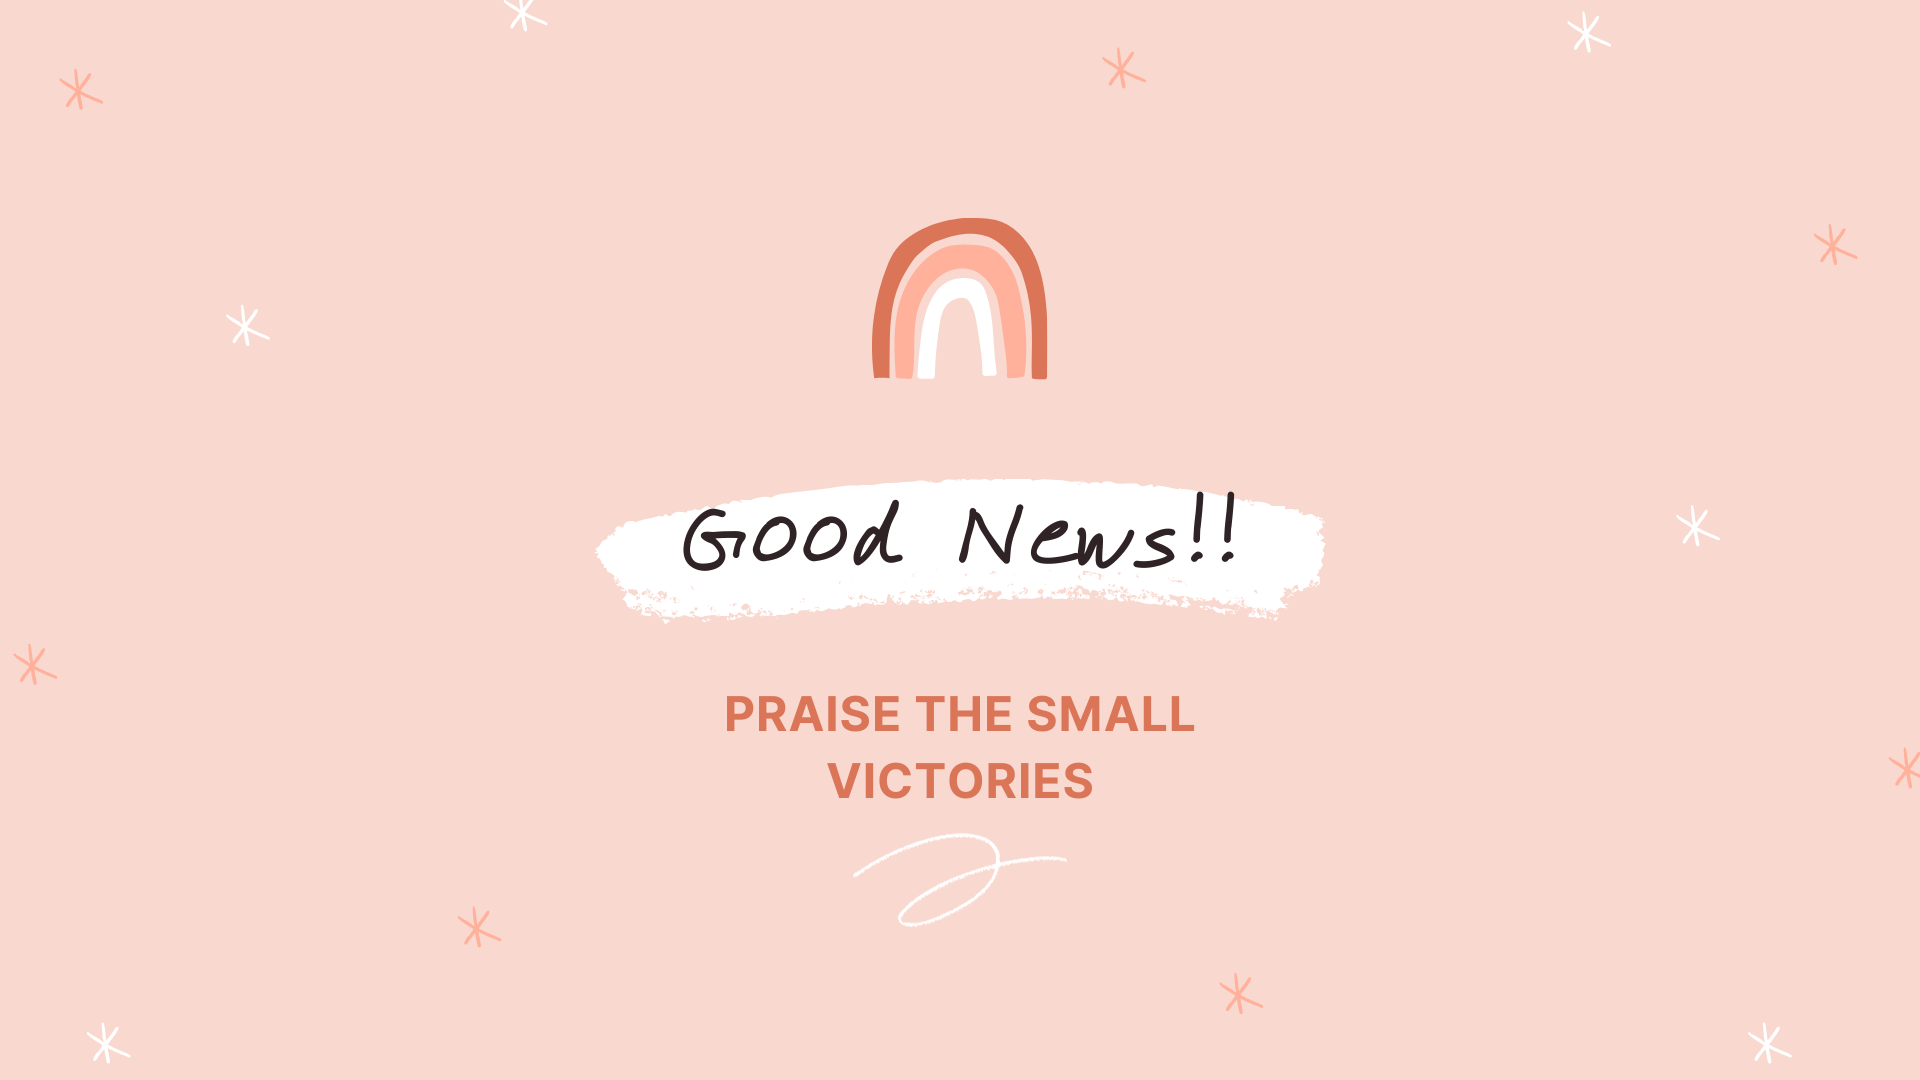 Our First Good News Day!